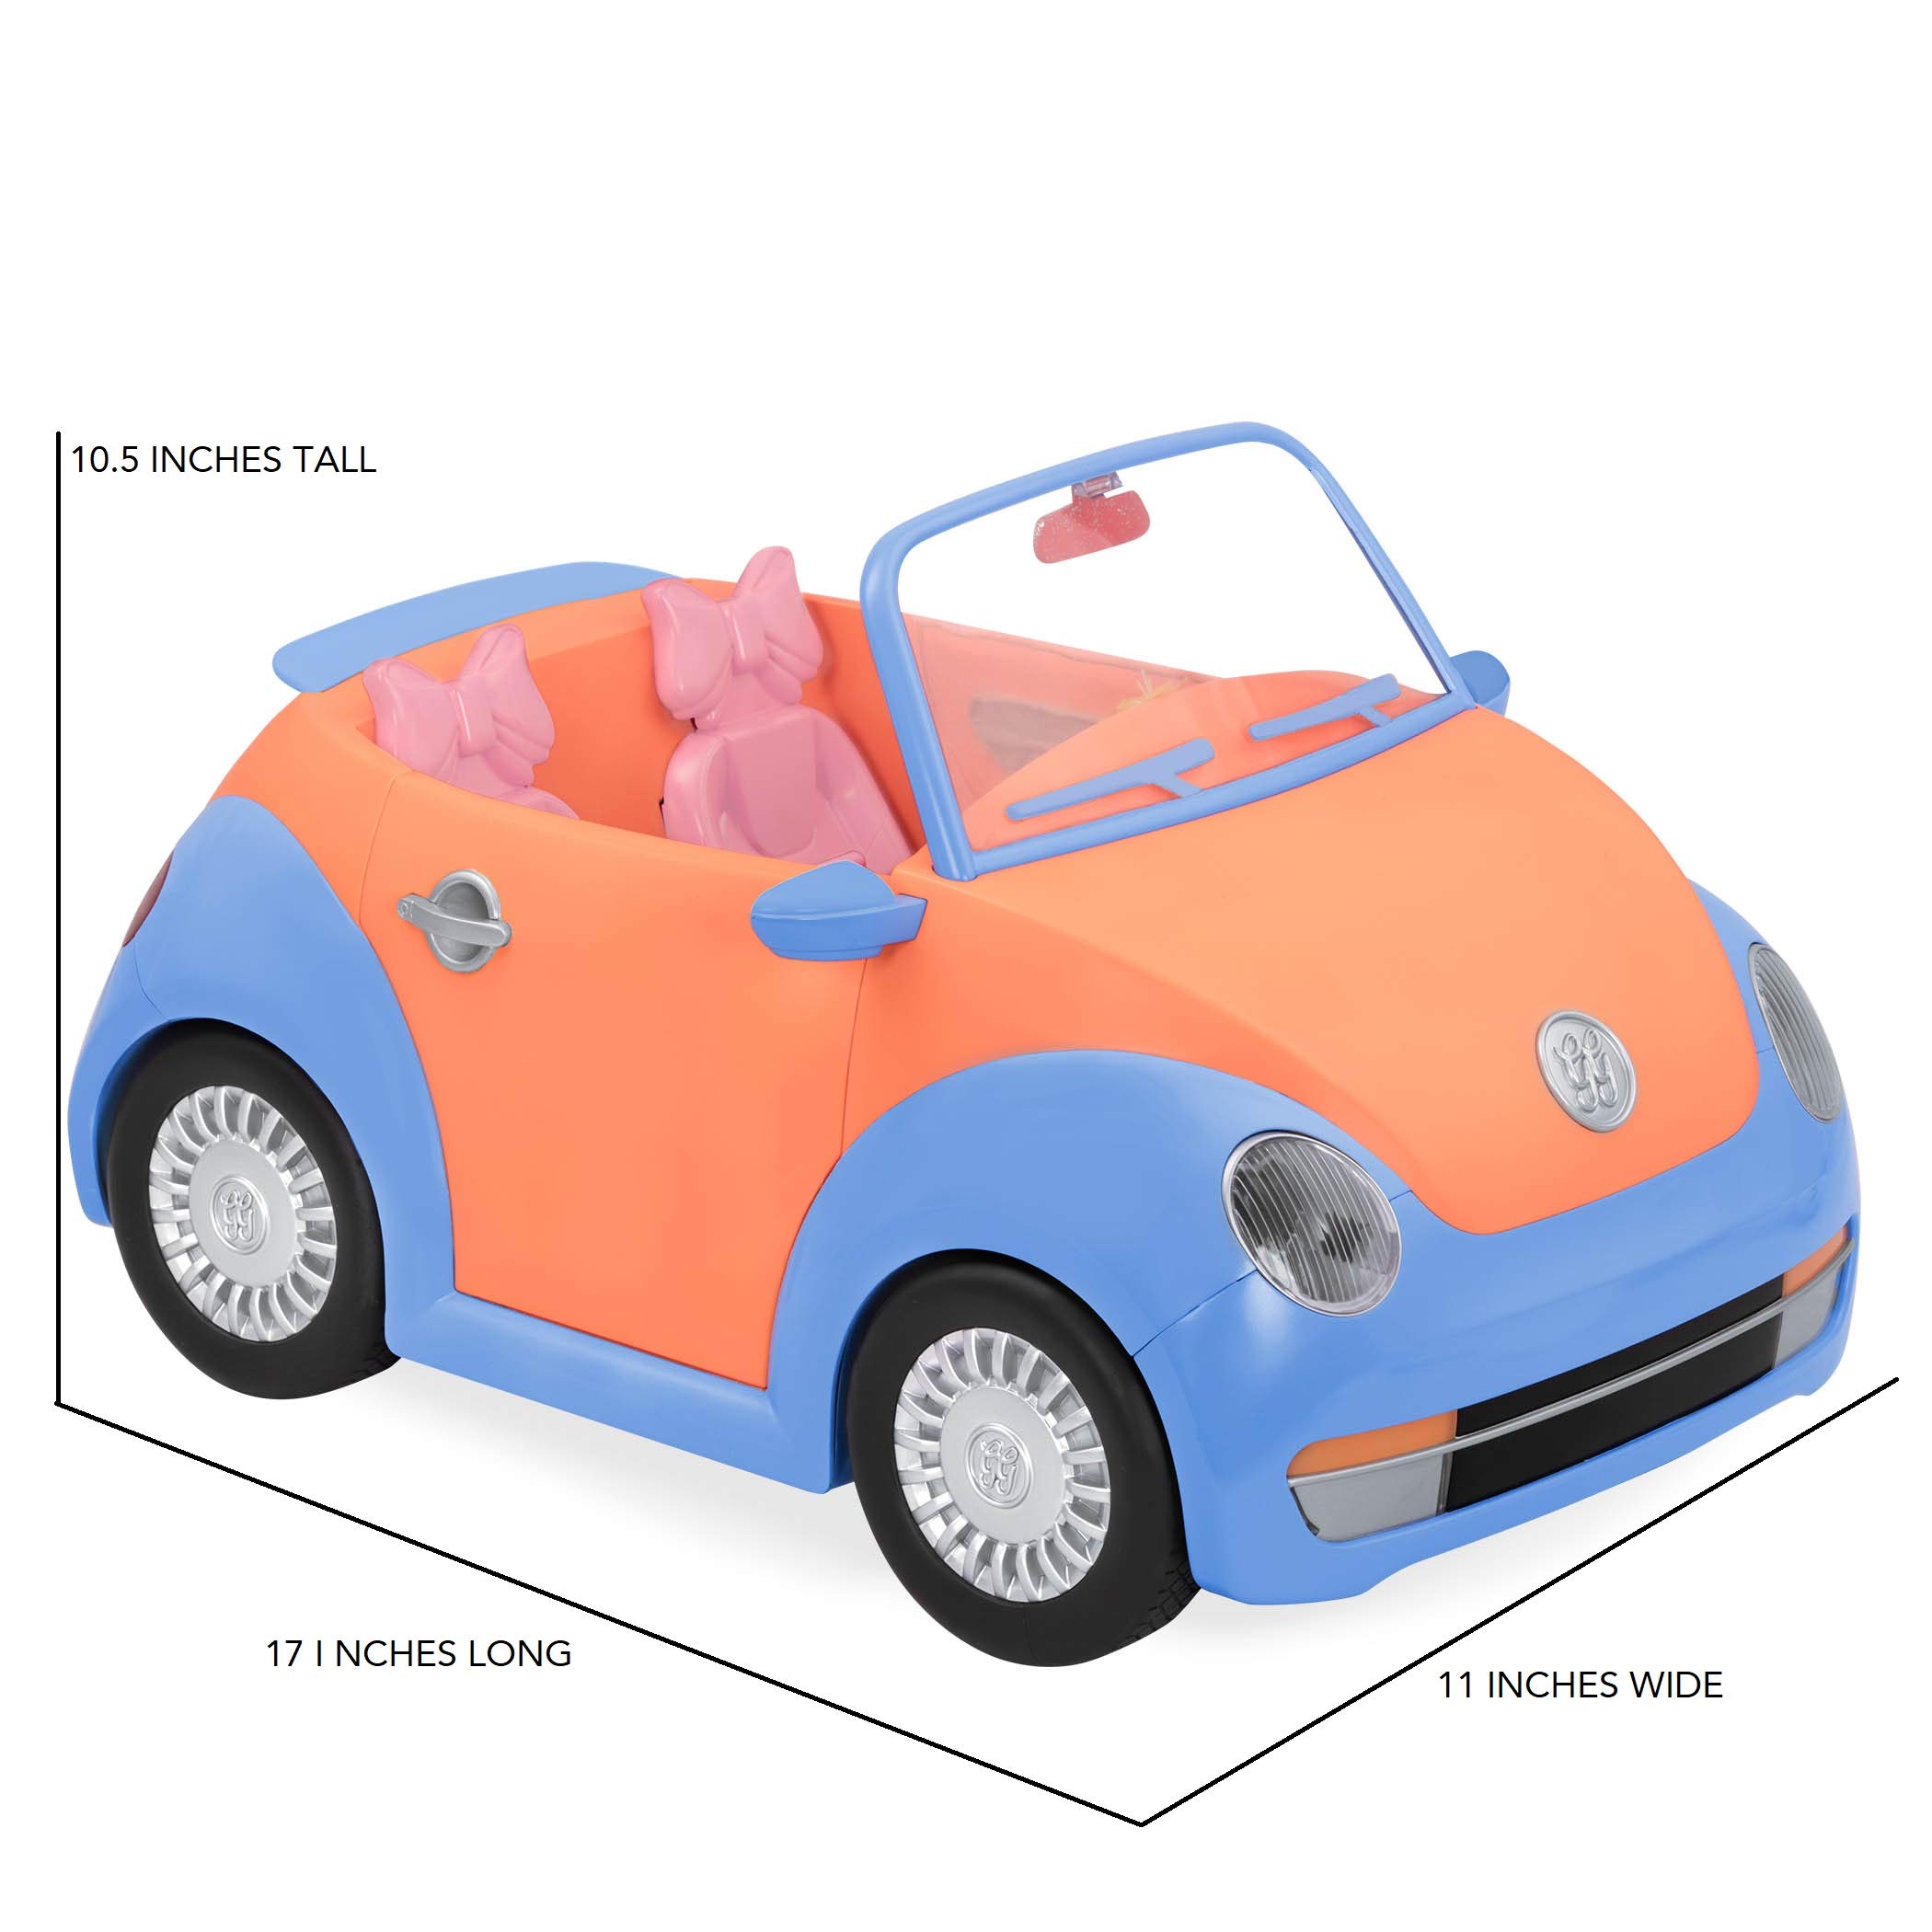 Glitter Girls - Convertible Car for 14-inch Dolls - Toys, Clothes & Accessories for Girls 3-Year-Old & Up, Blue, Orange, Pink